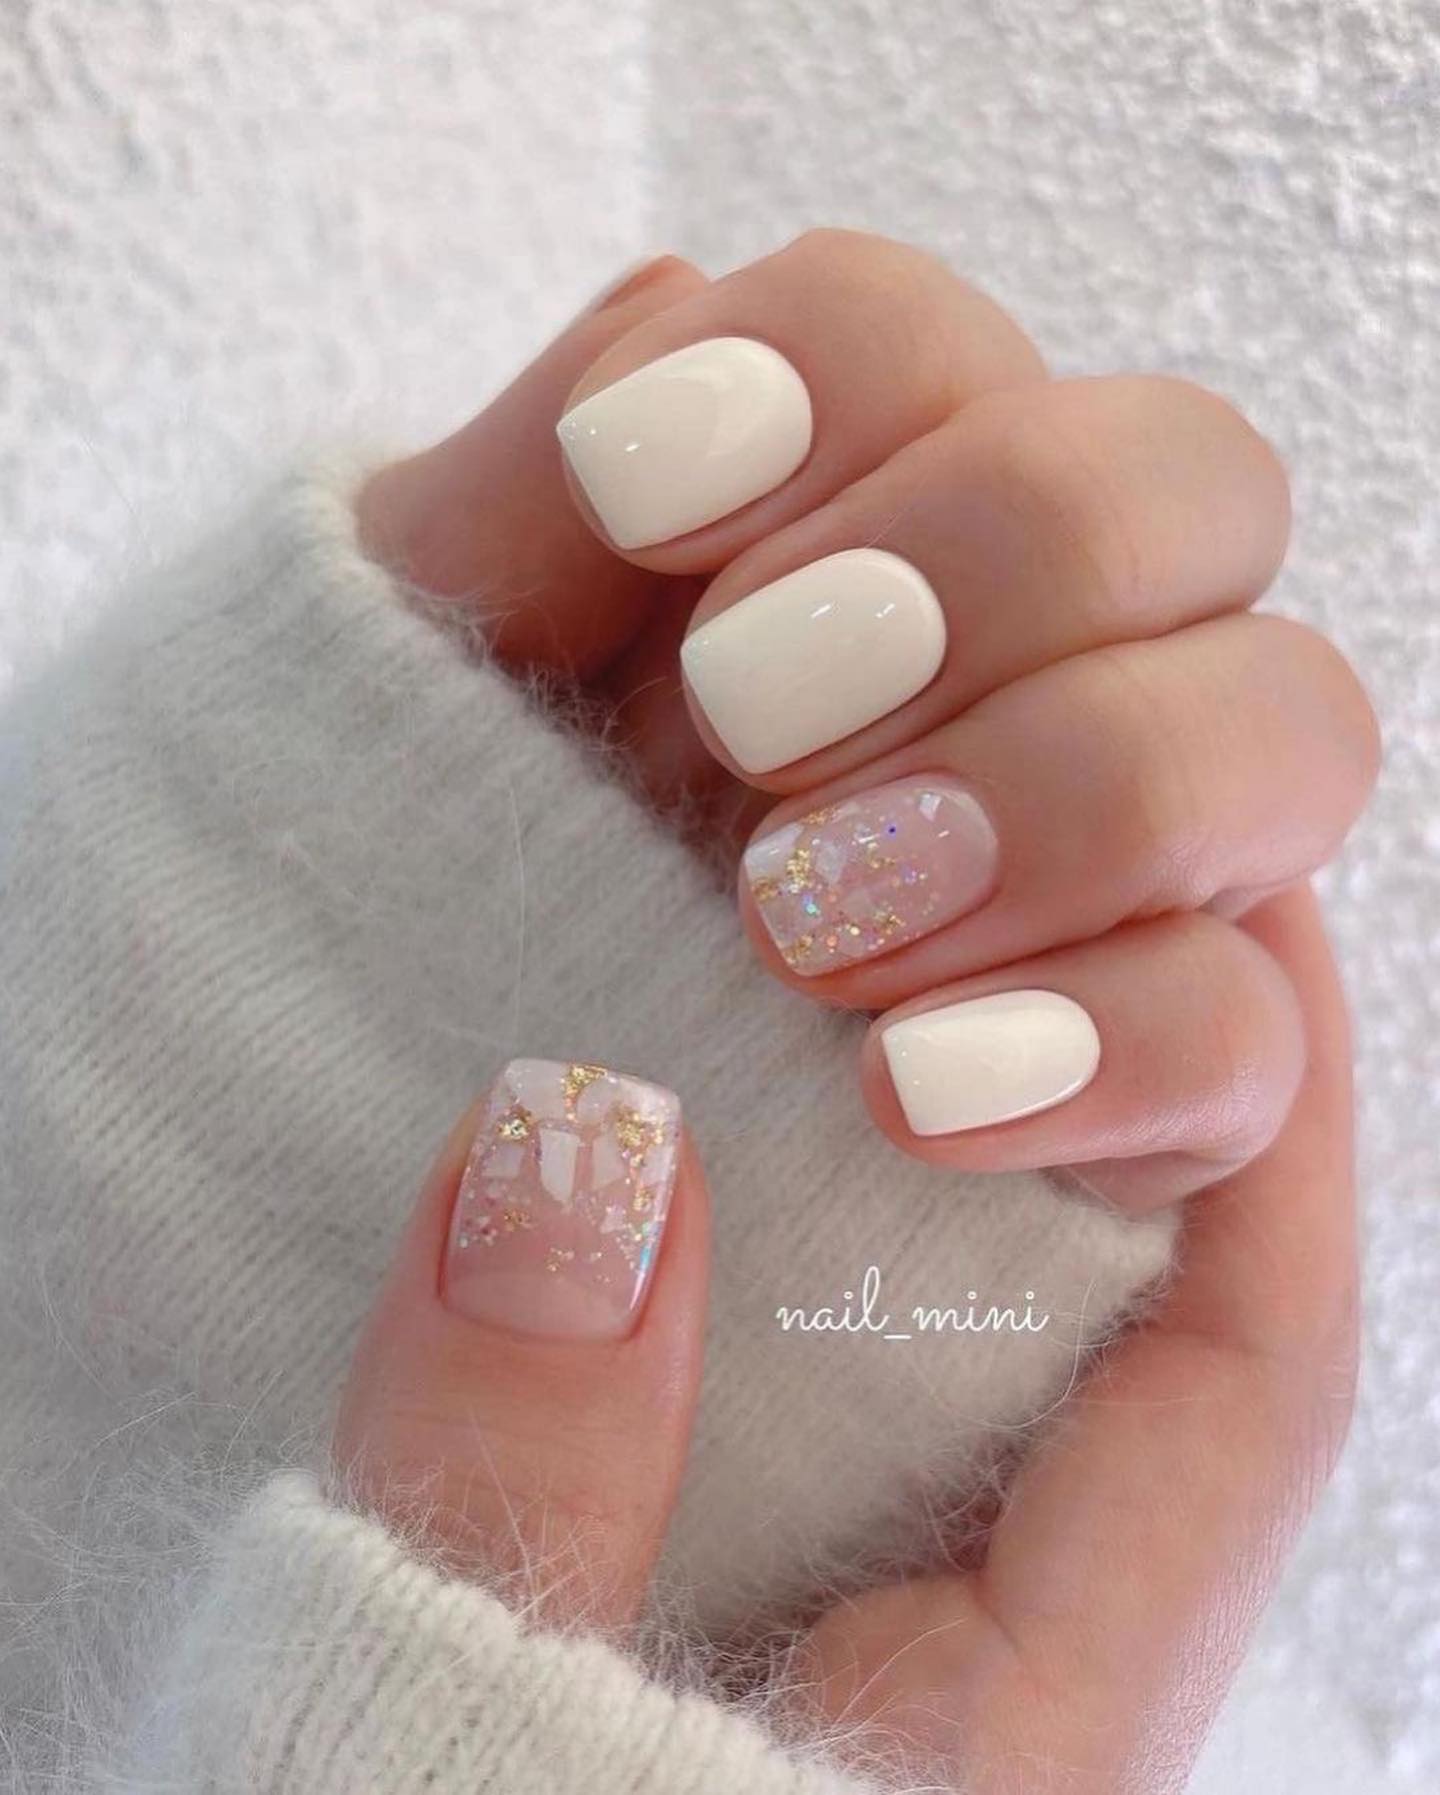 100 Of The Best Spring Inspired Nail Designs images 53